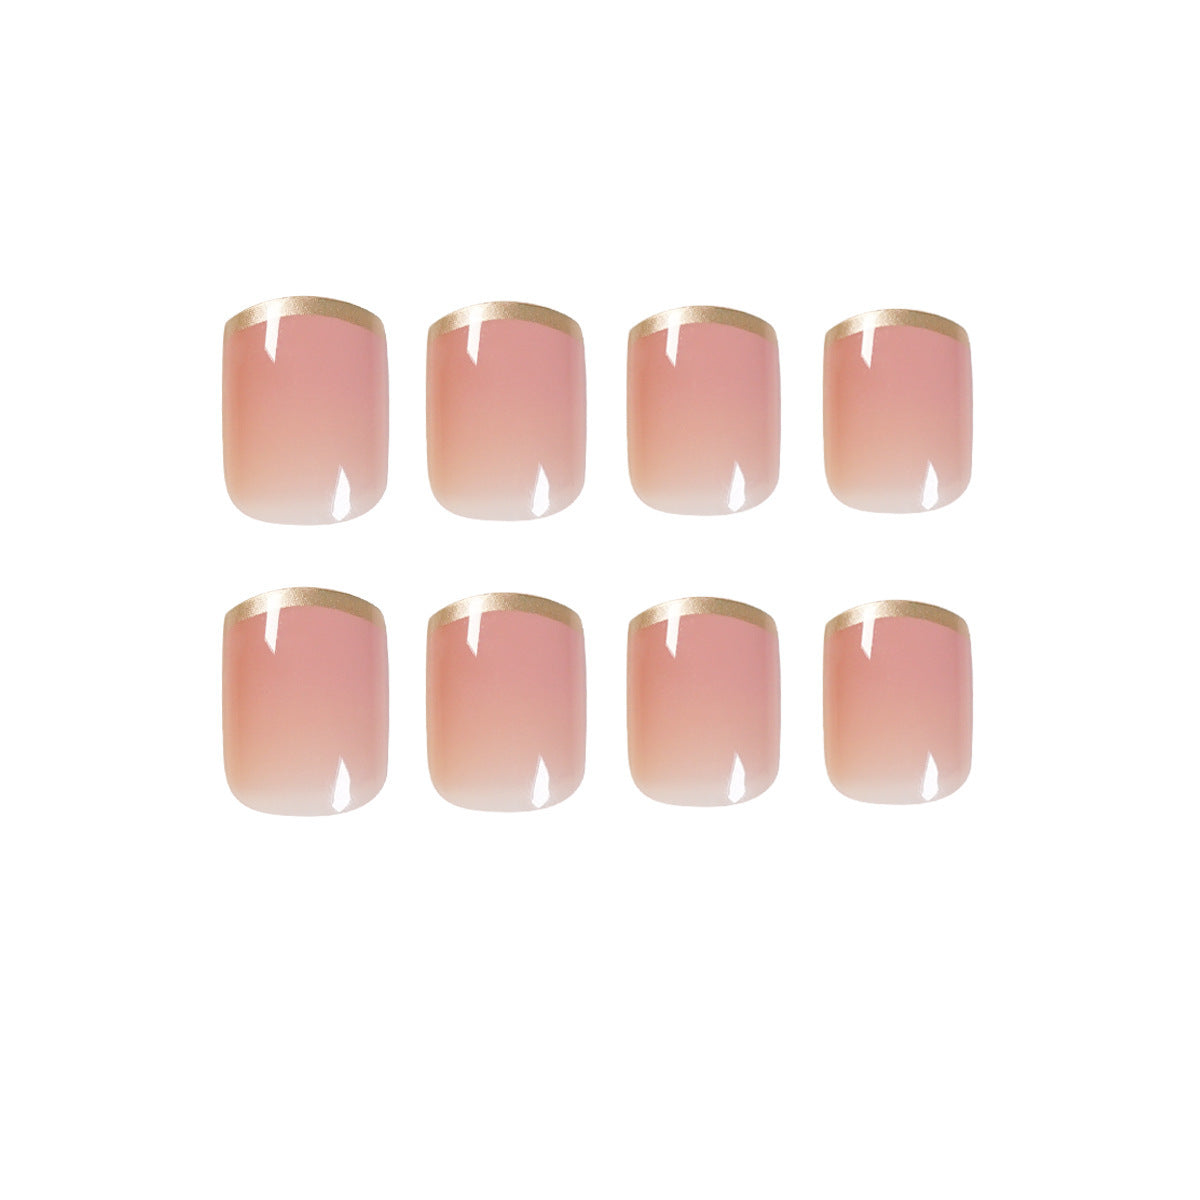 Nail manicure pieces, removable French fake nails, wearable nail pieces, manicure nail patches